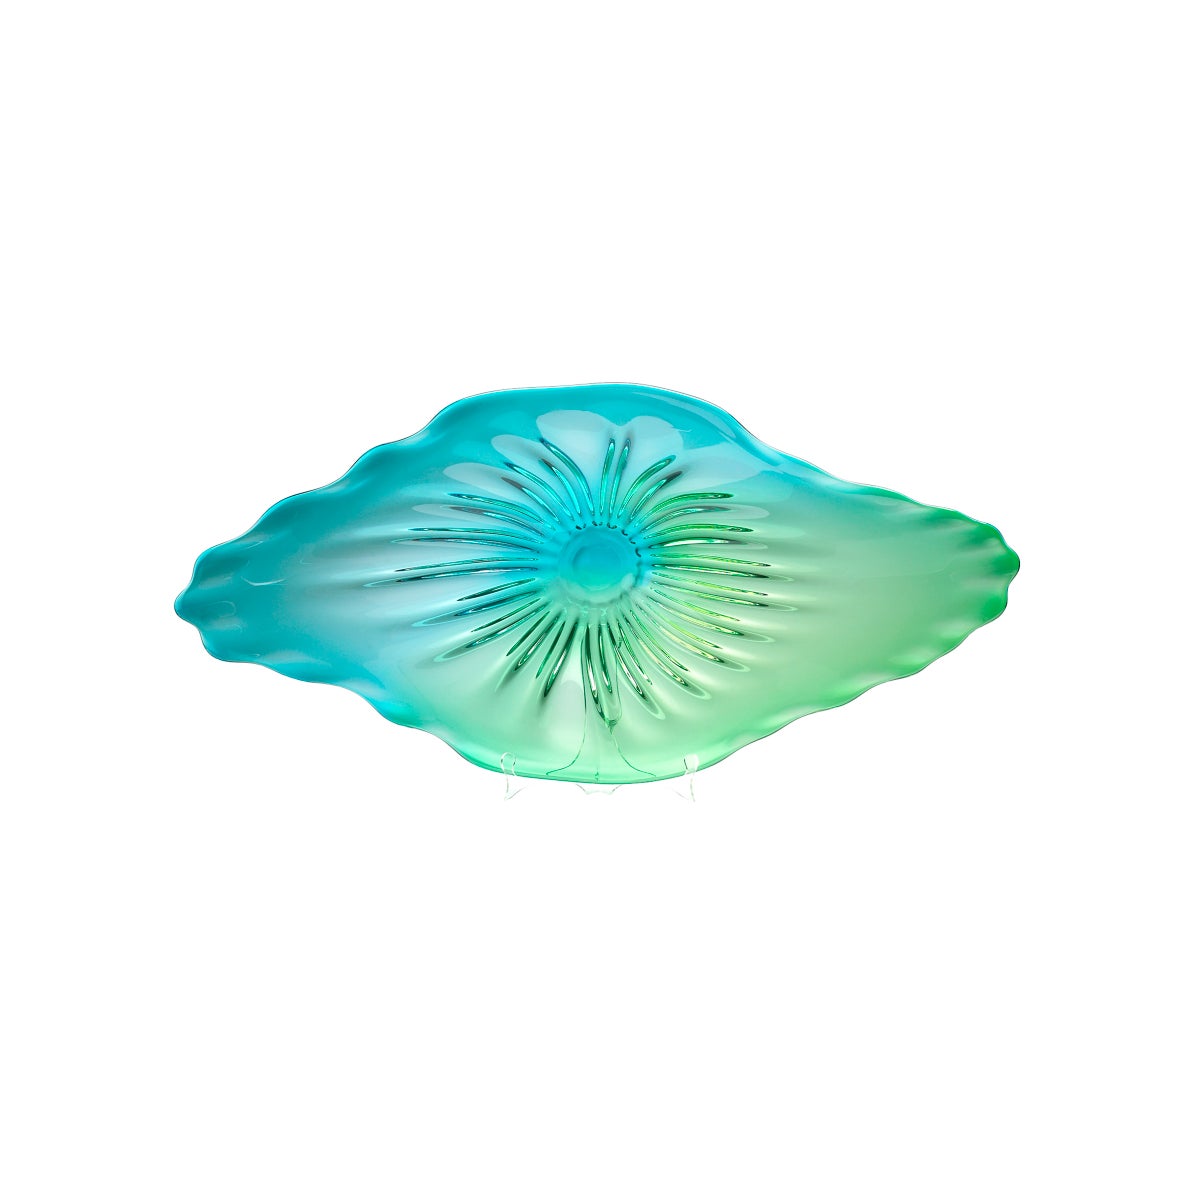 Art Glass Plate | Turquoise